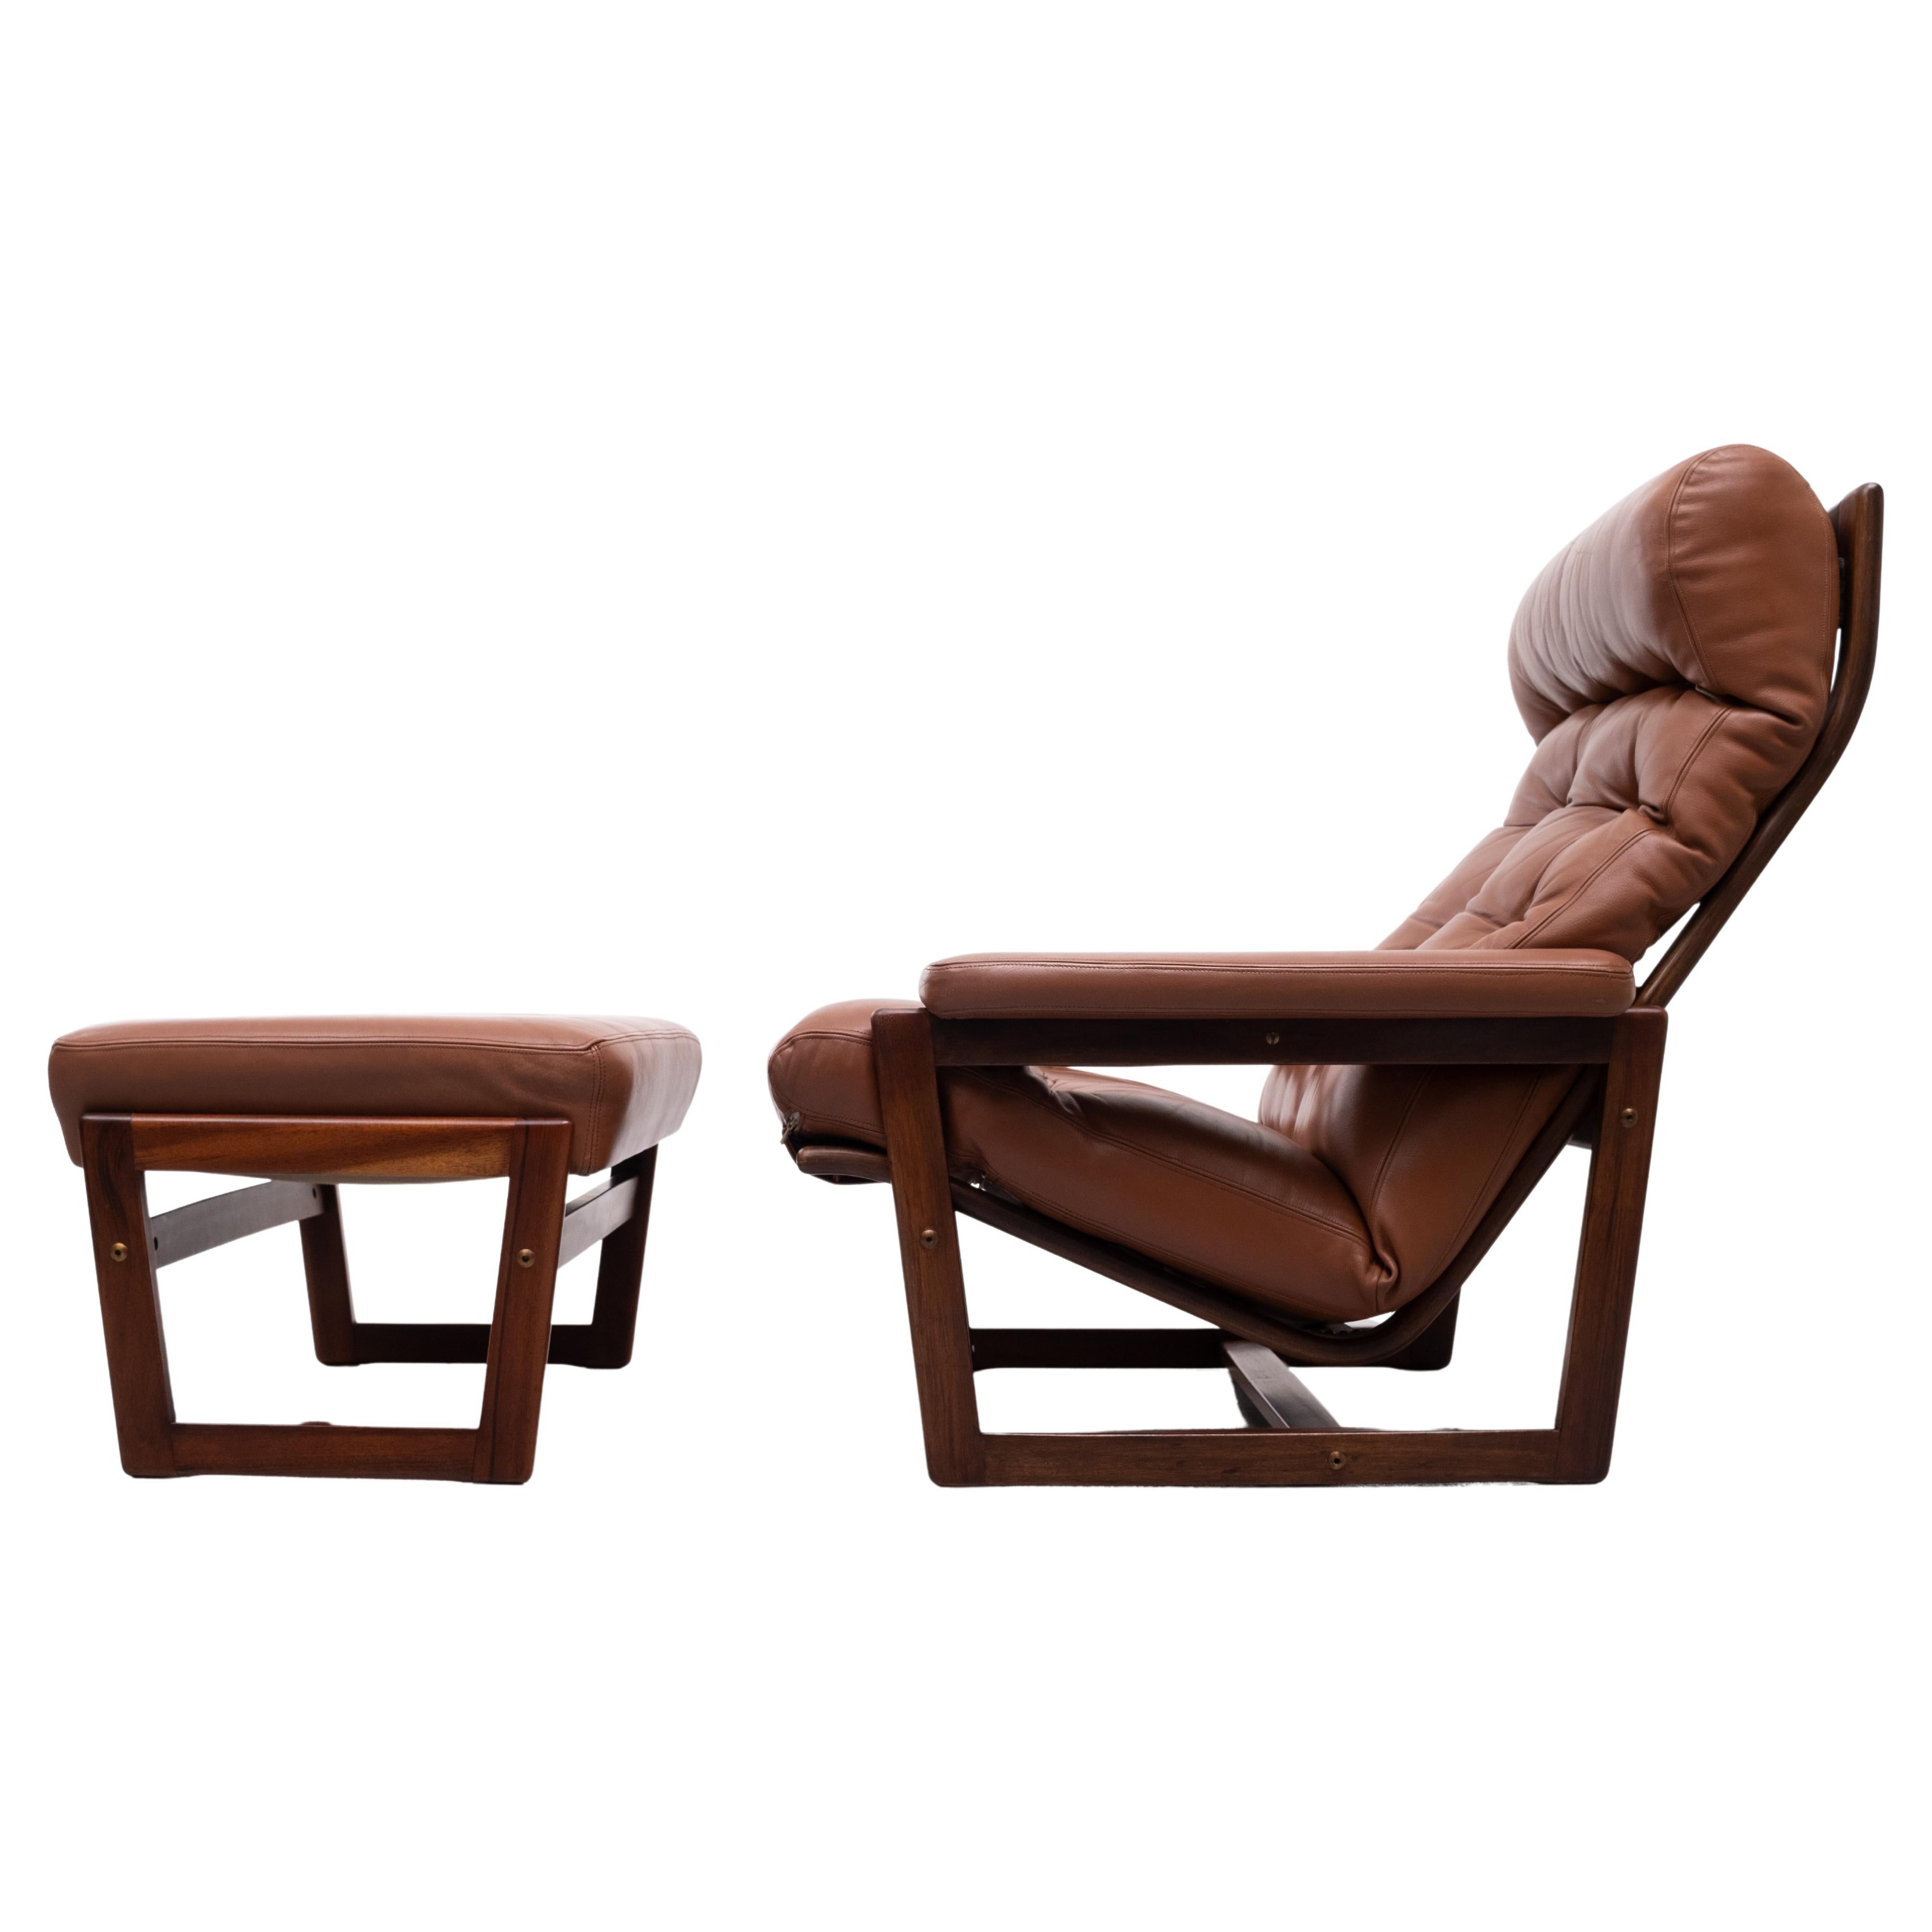 Leather Lounge Chair and Ottoman, 1970s, Denmark